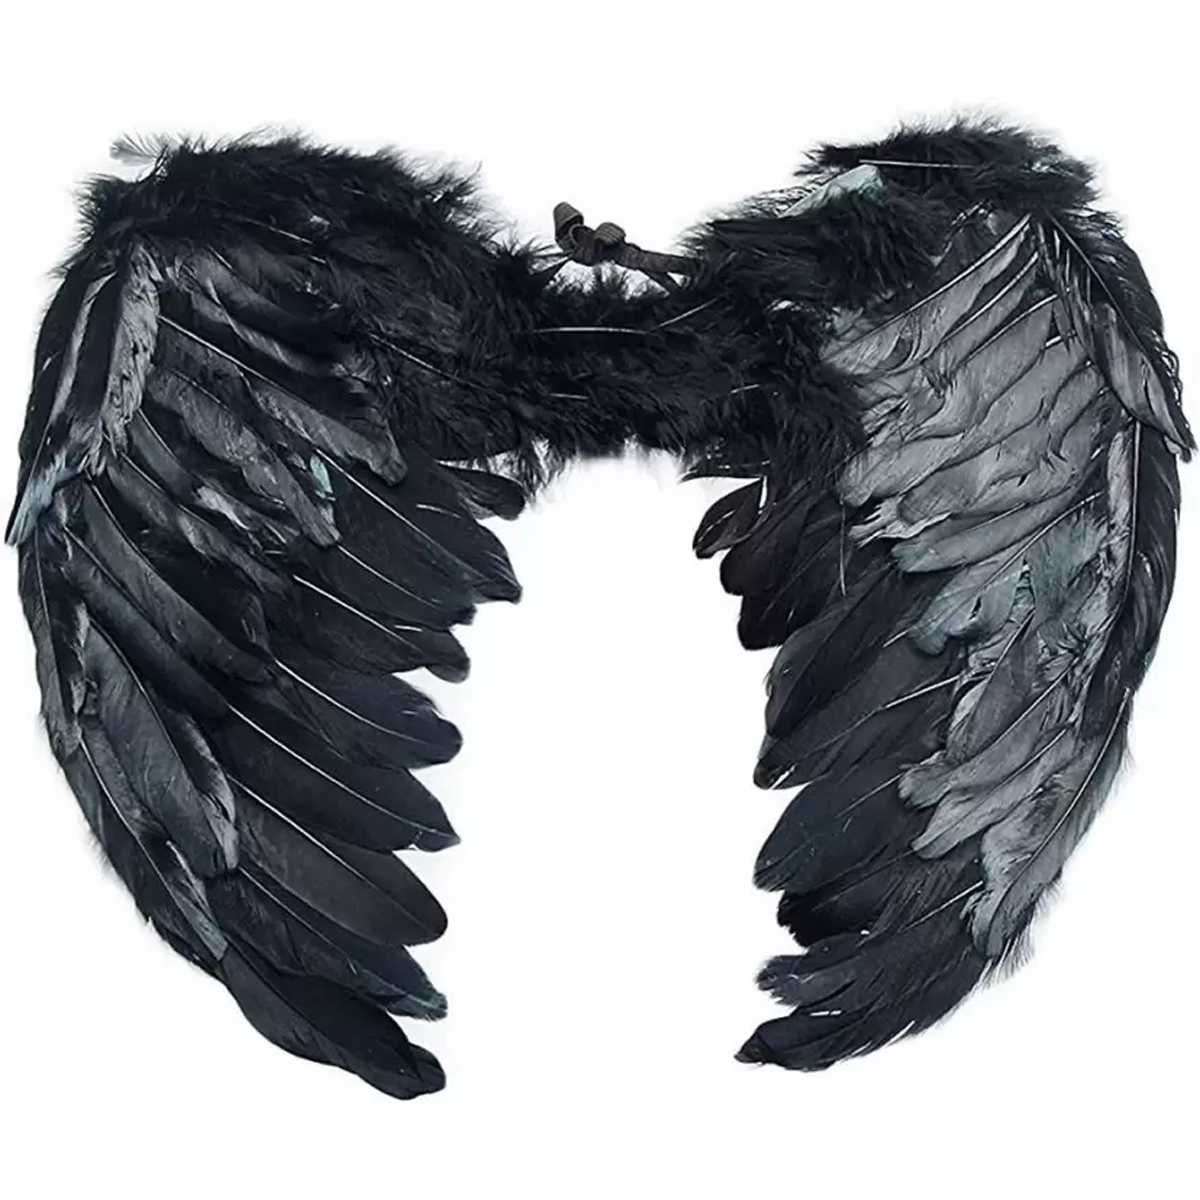 Feather Angel Wings Christmas Halloween Costume / Fancy Dress 54x36 Cms - Willow